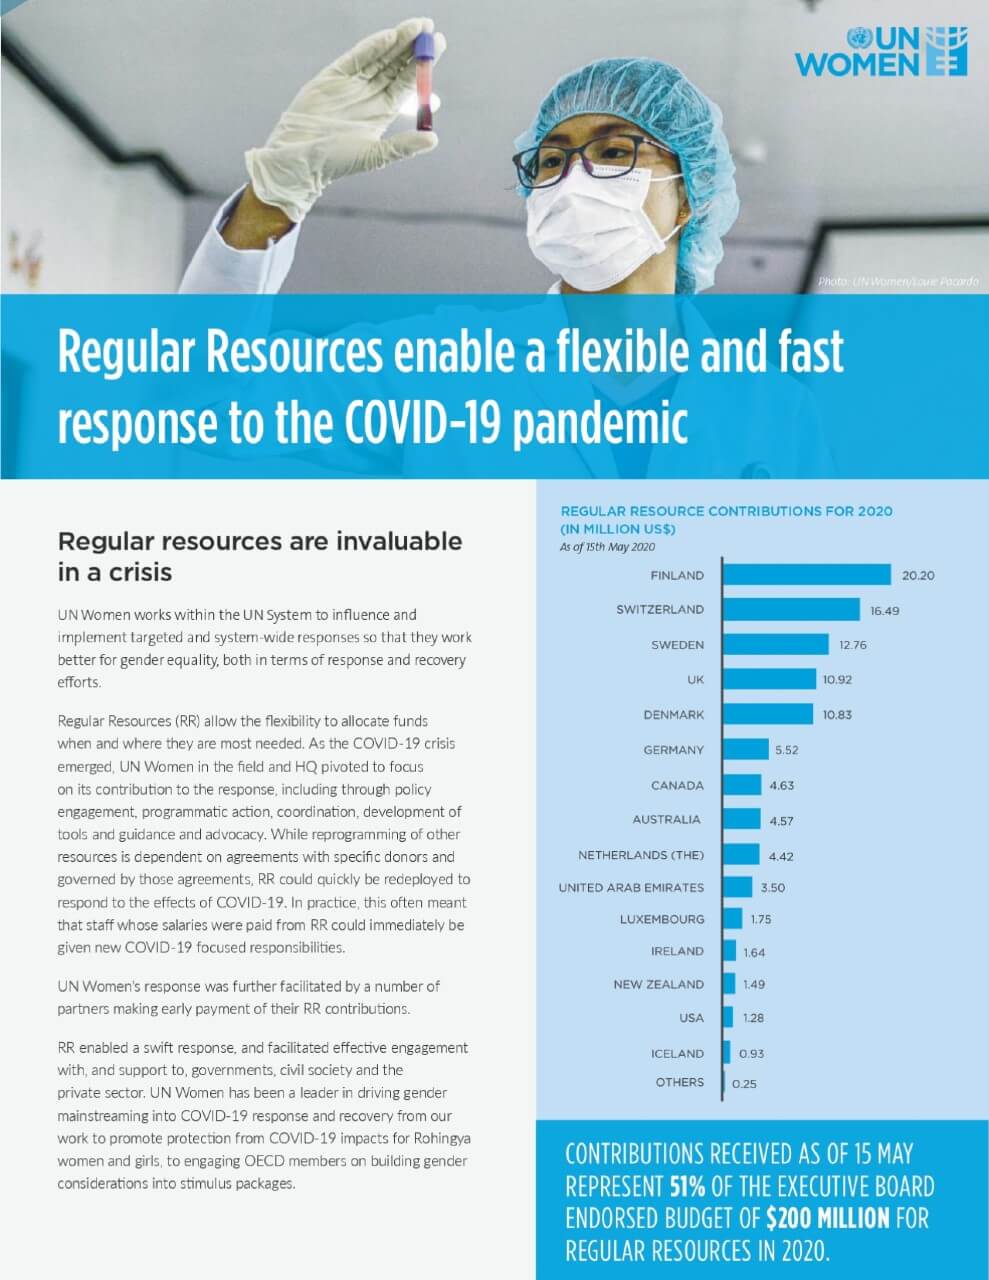 Regular resources enable a flexible and fast response to the COVID-19 pandemic